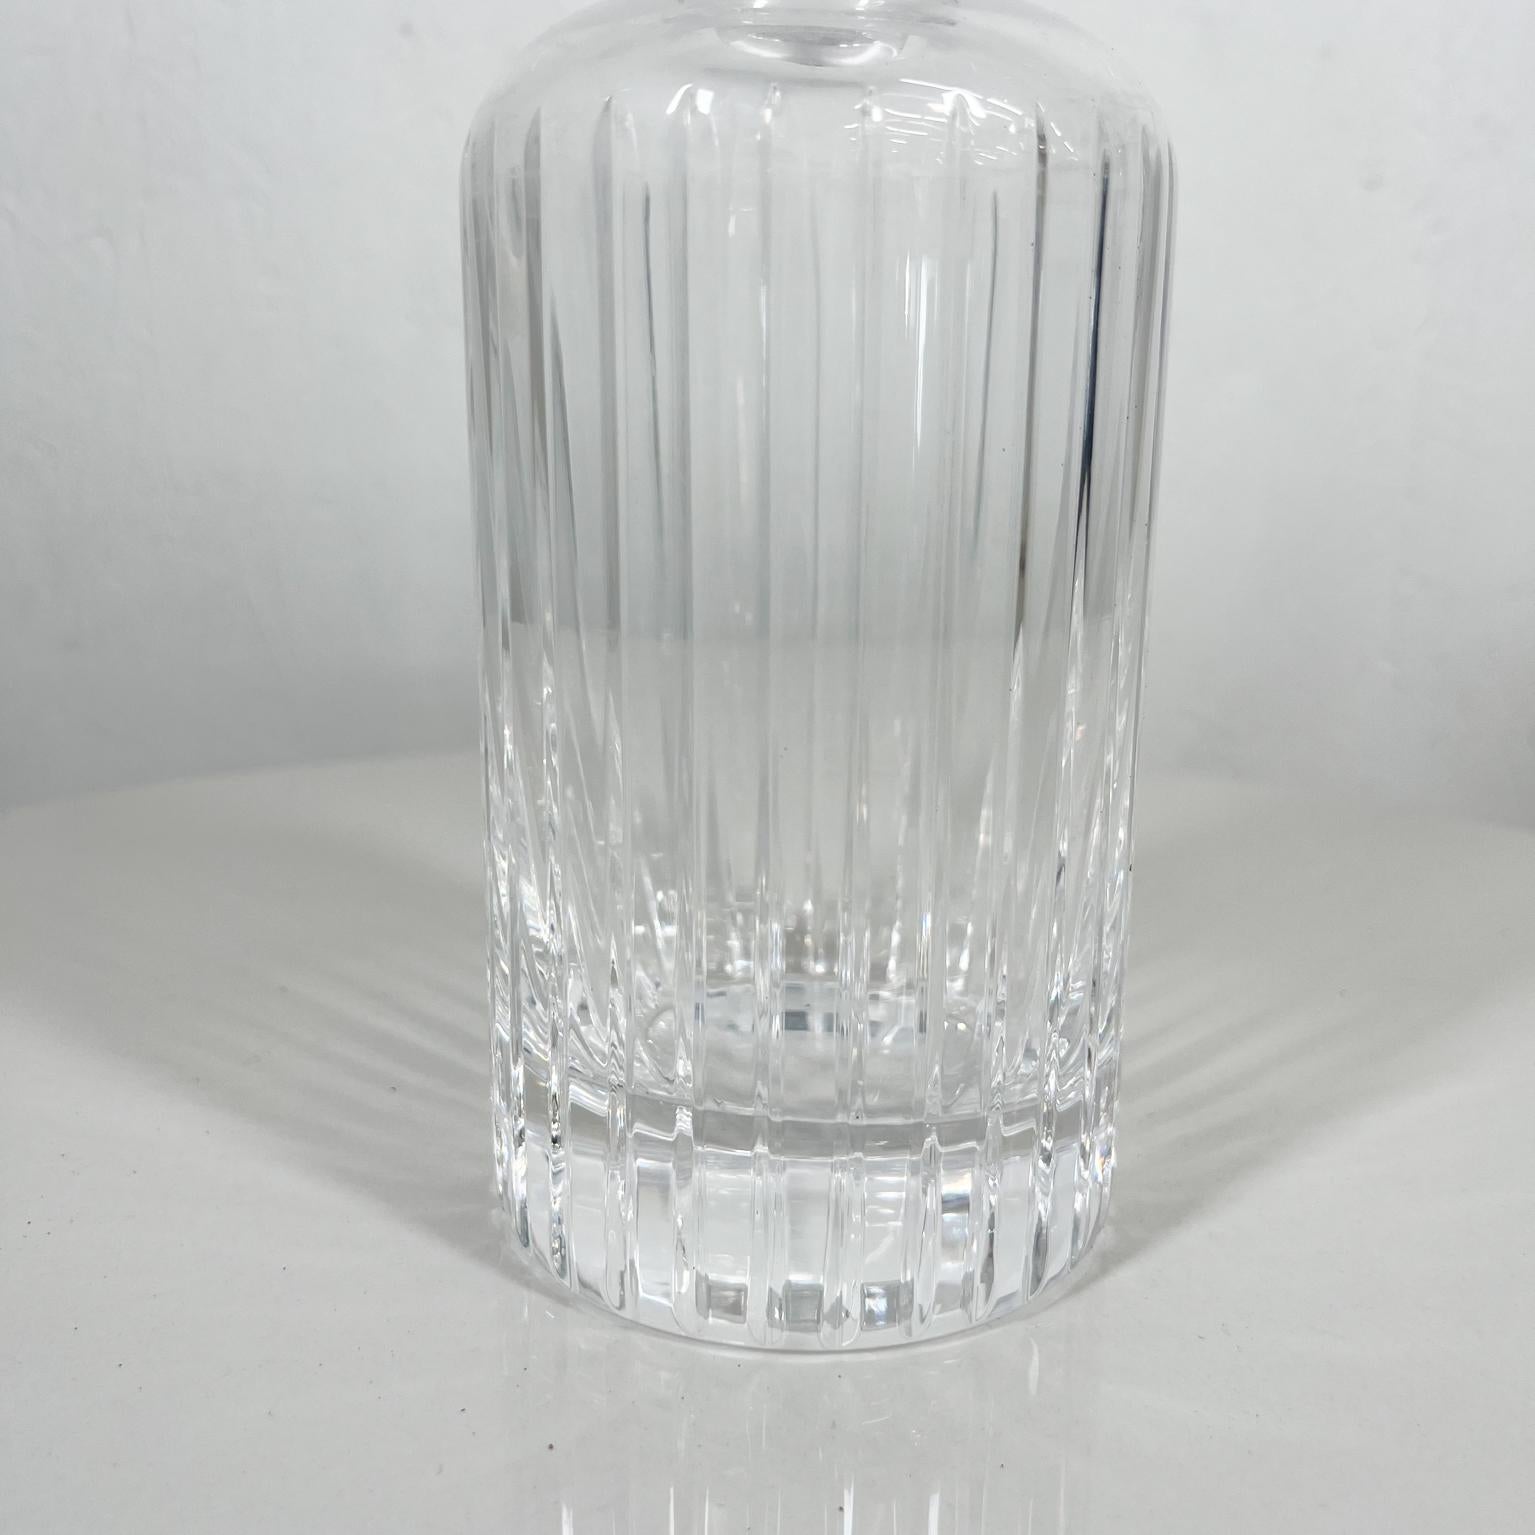 1960s Modern Ribbed Crystal Glass Decanter from Italy In Good Condition For Sale In Chula Vista, CA